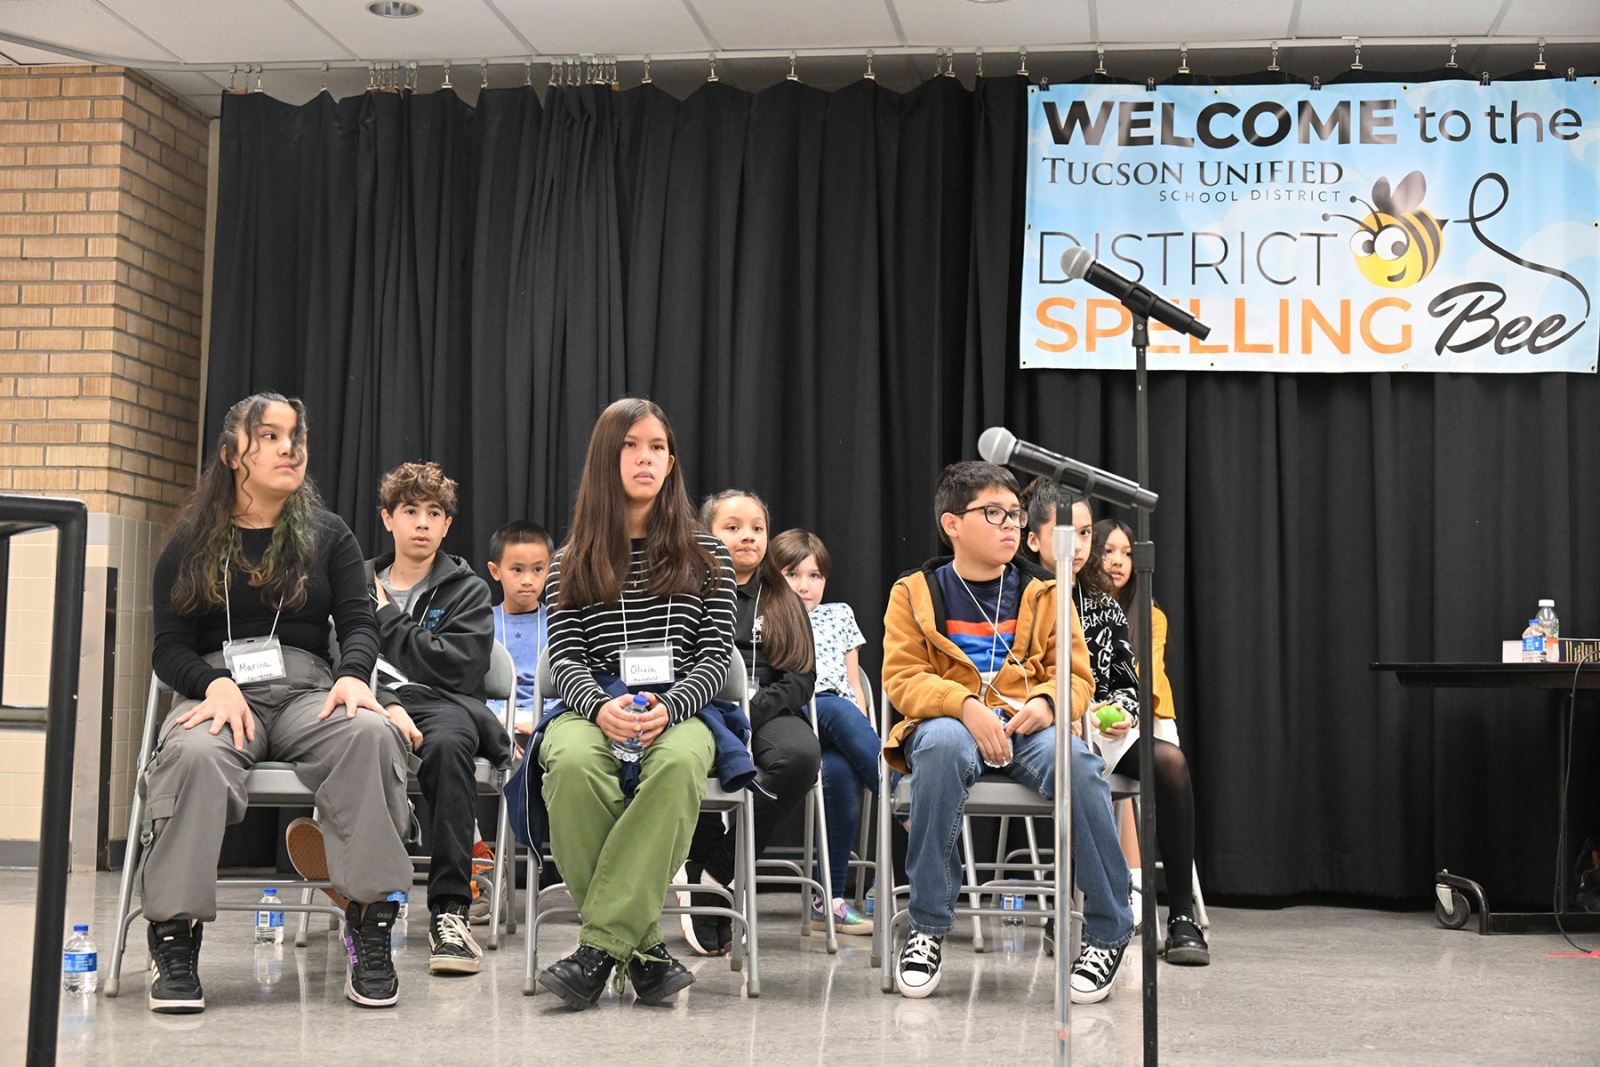 The spelling bee competitors sit waiting for their turn to spell.